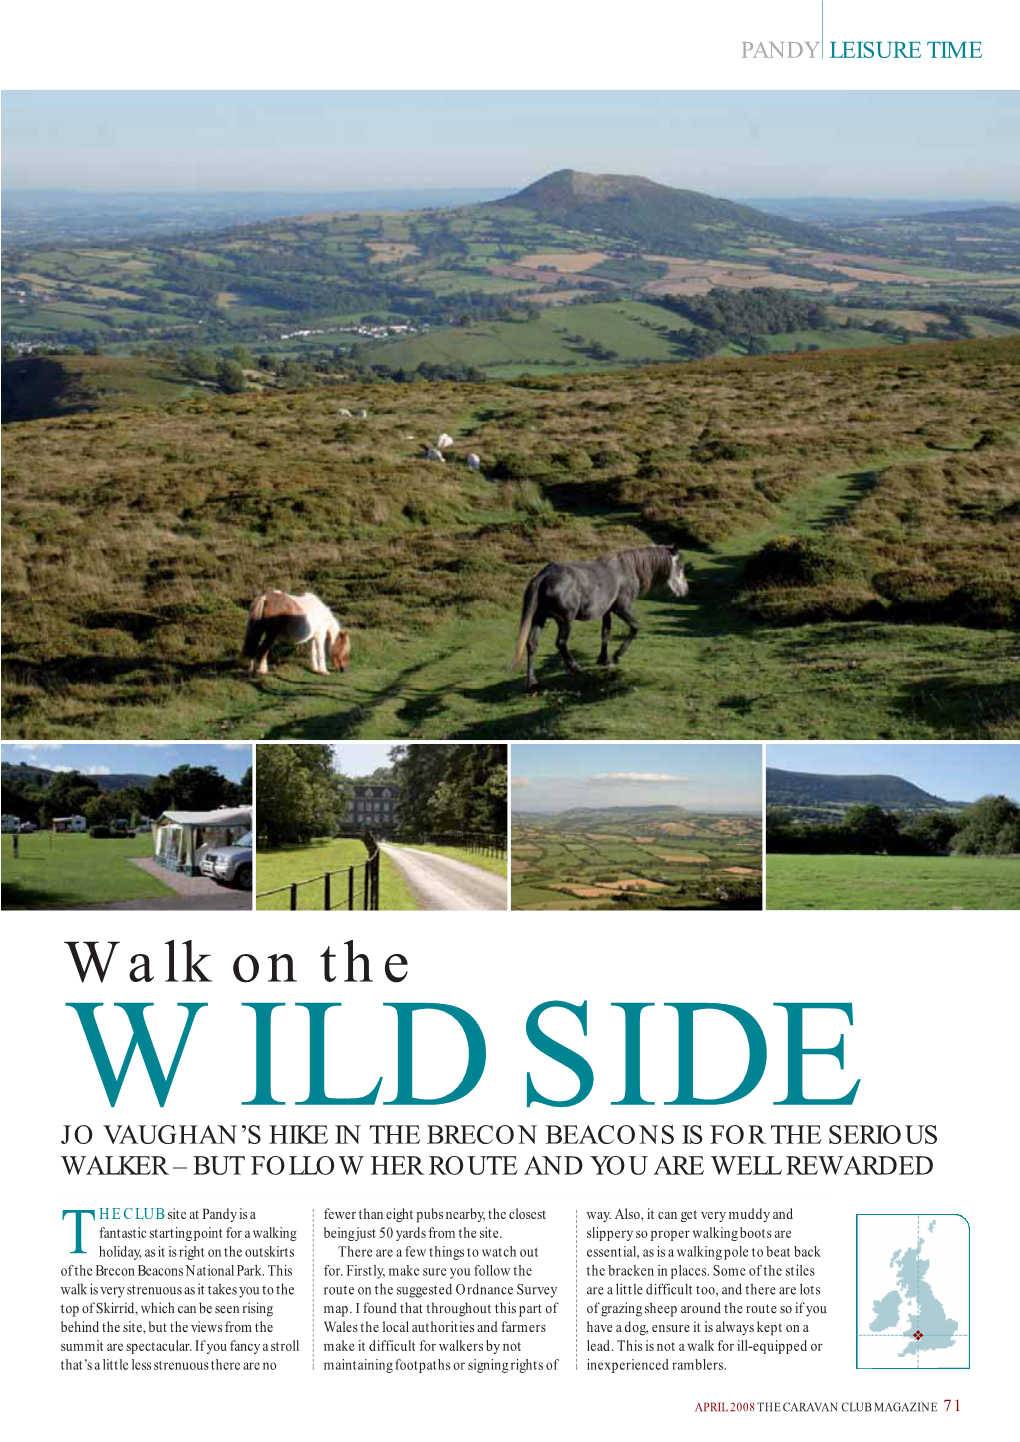 Walk on the WILDSIDE JO VAUGHAN’S HIKE in the BRECON BEACONS IS for the SERIOUS WALKER – but FOLLOW HER ROUTE and YOU ARE WELL REWARDED